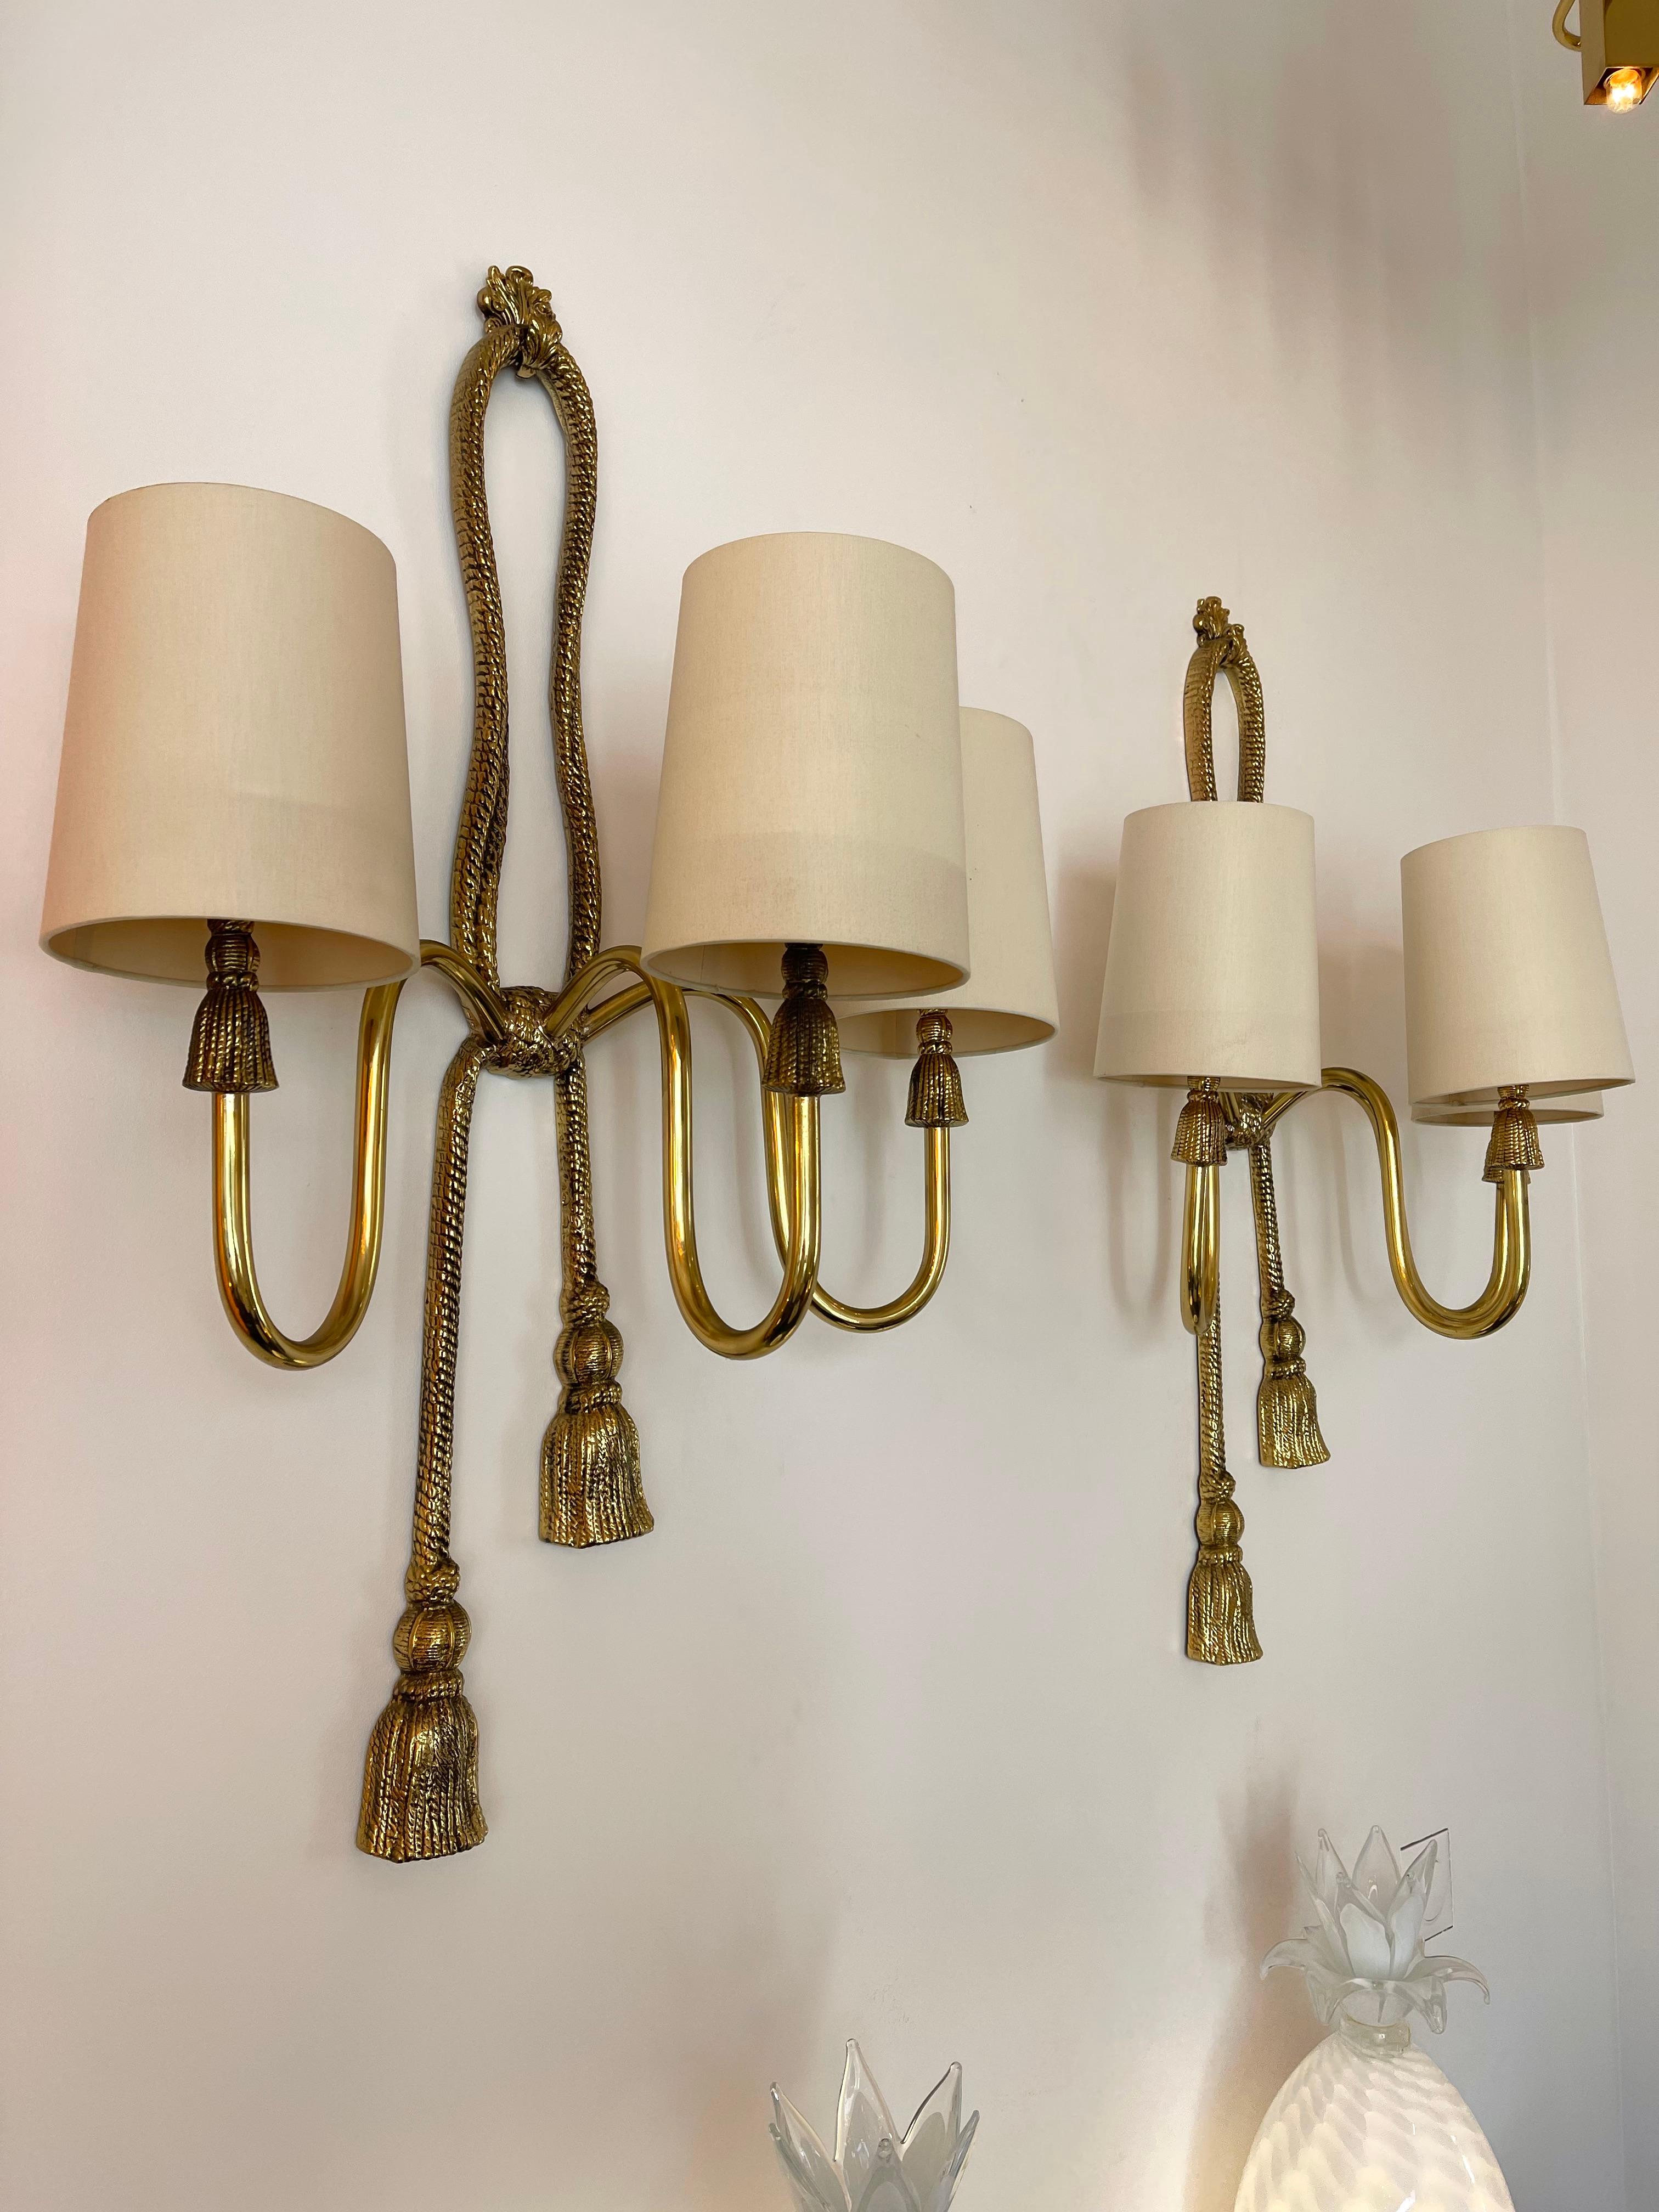 Pair of Gilt Bronze and Brass Knot Sconces by Valenti. Spain, 1980s For Sale 7